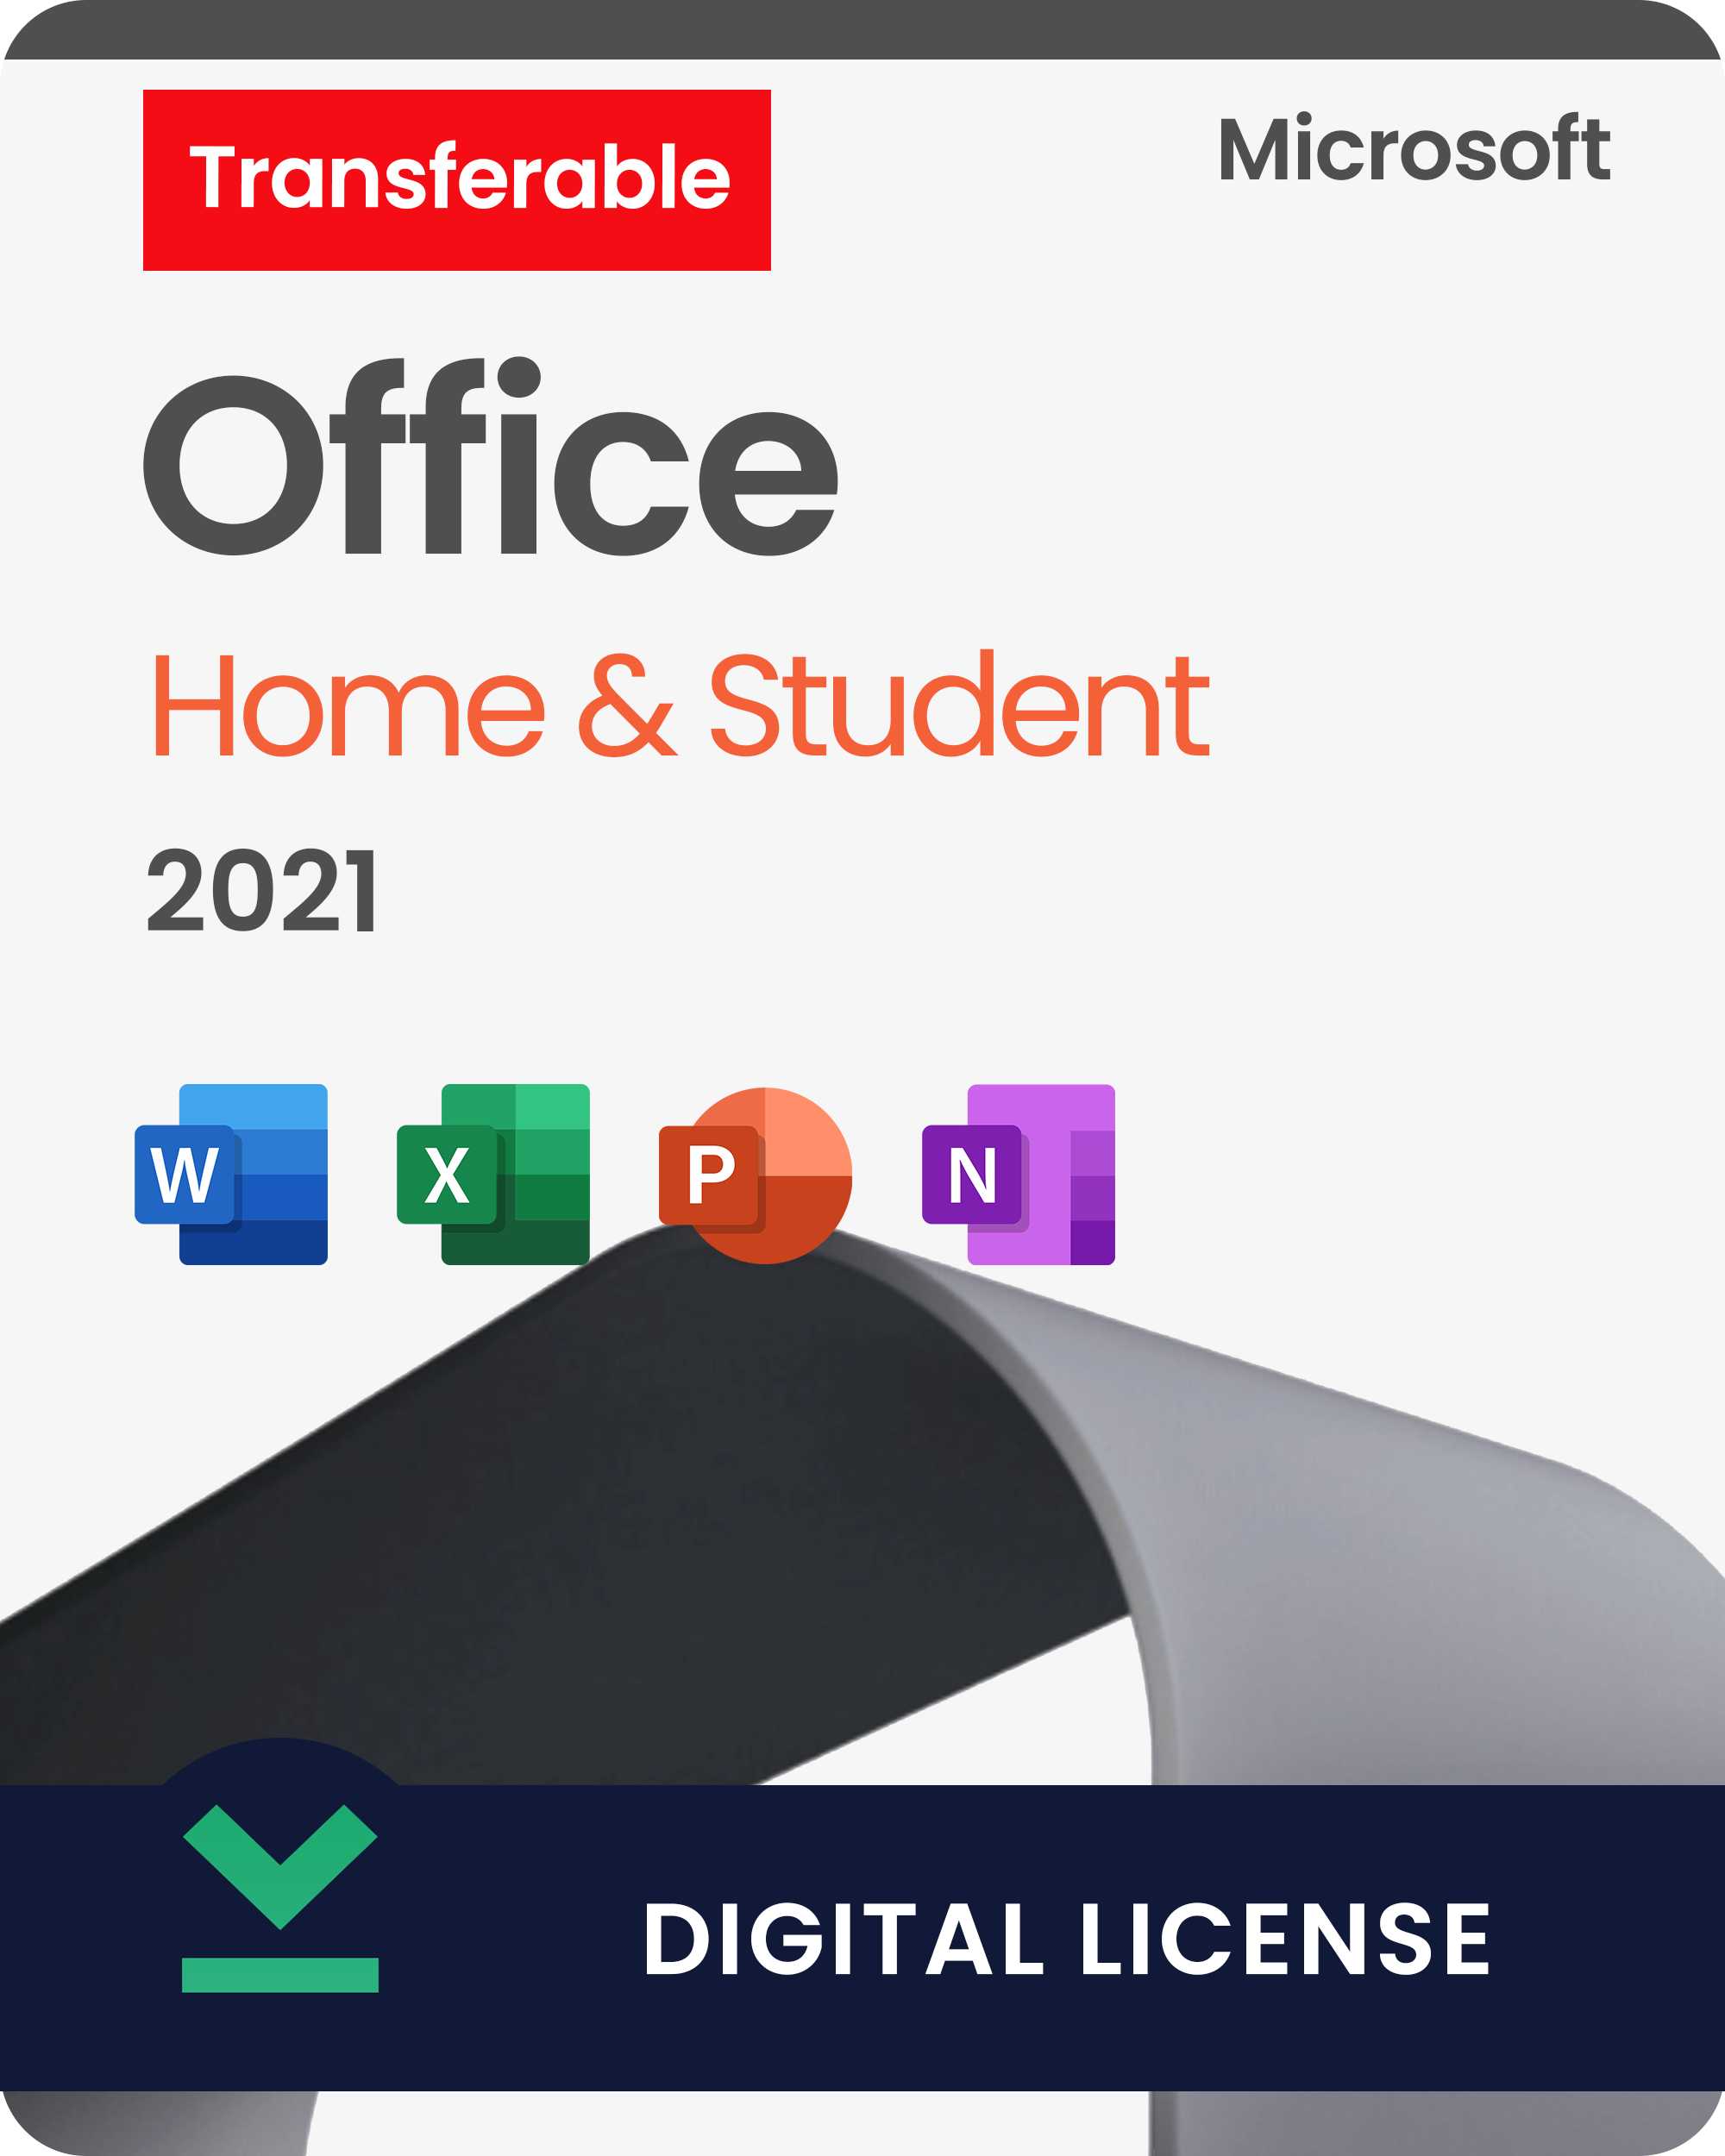 product key office 365 free 2021